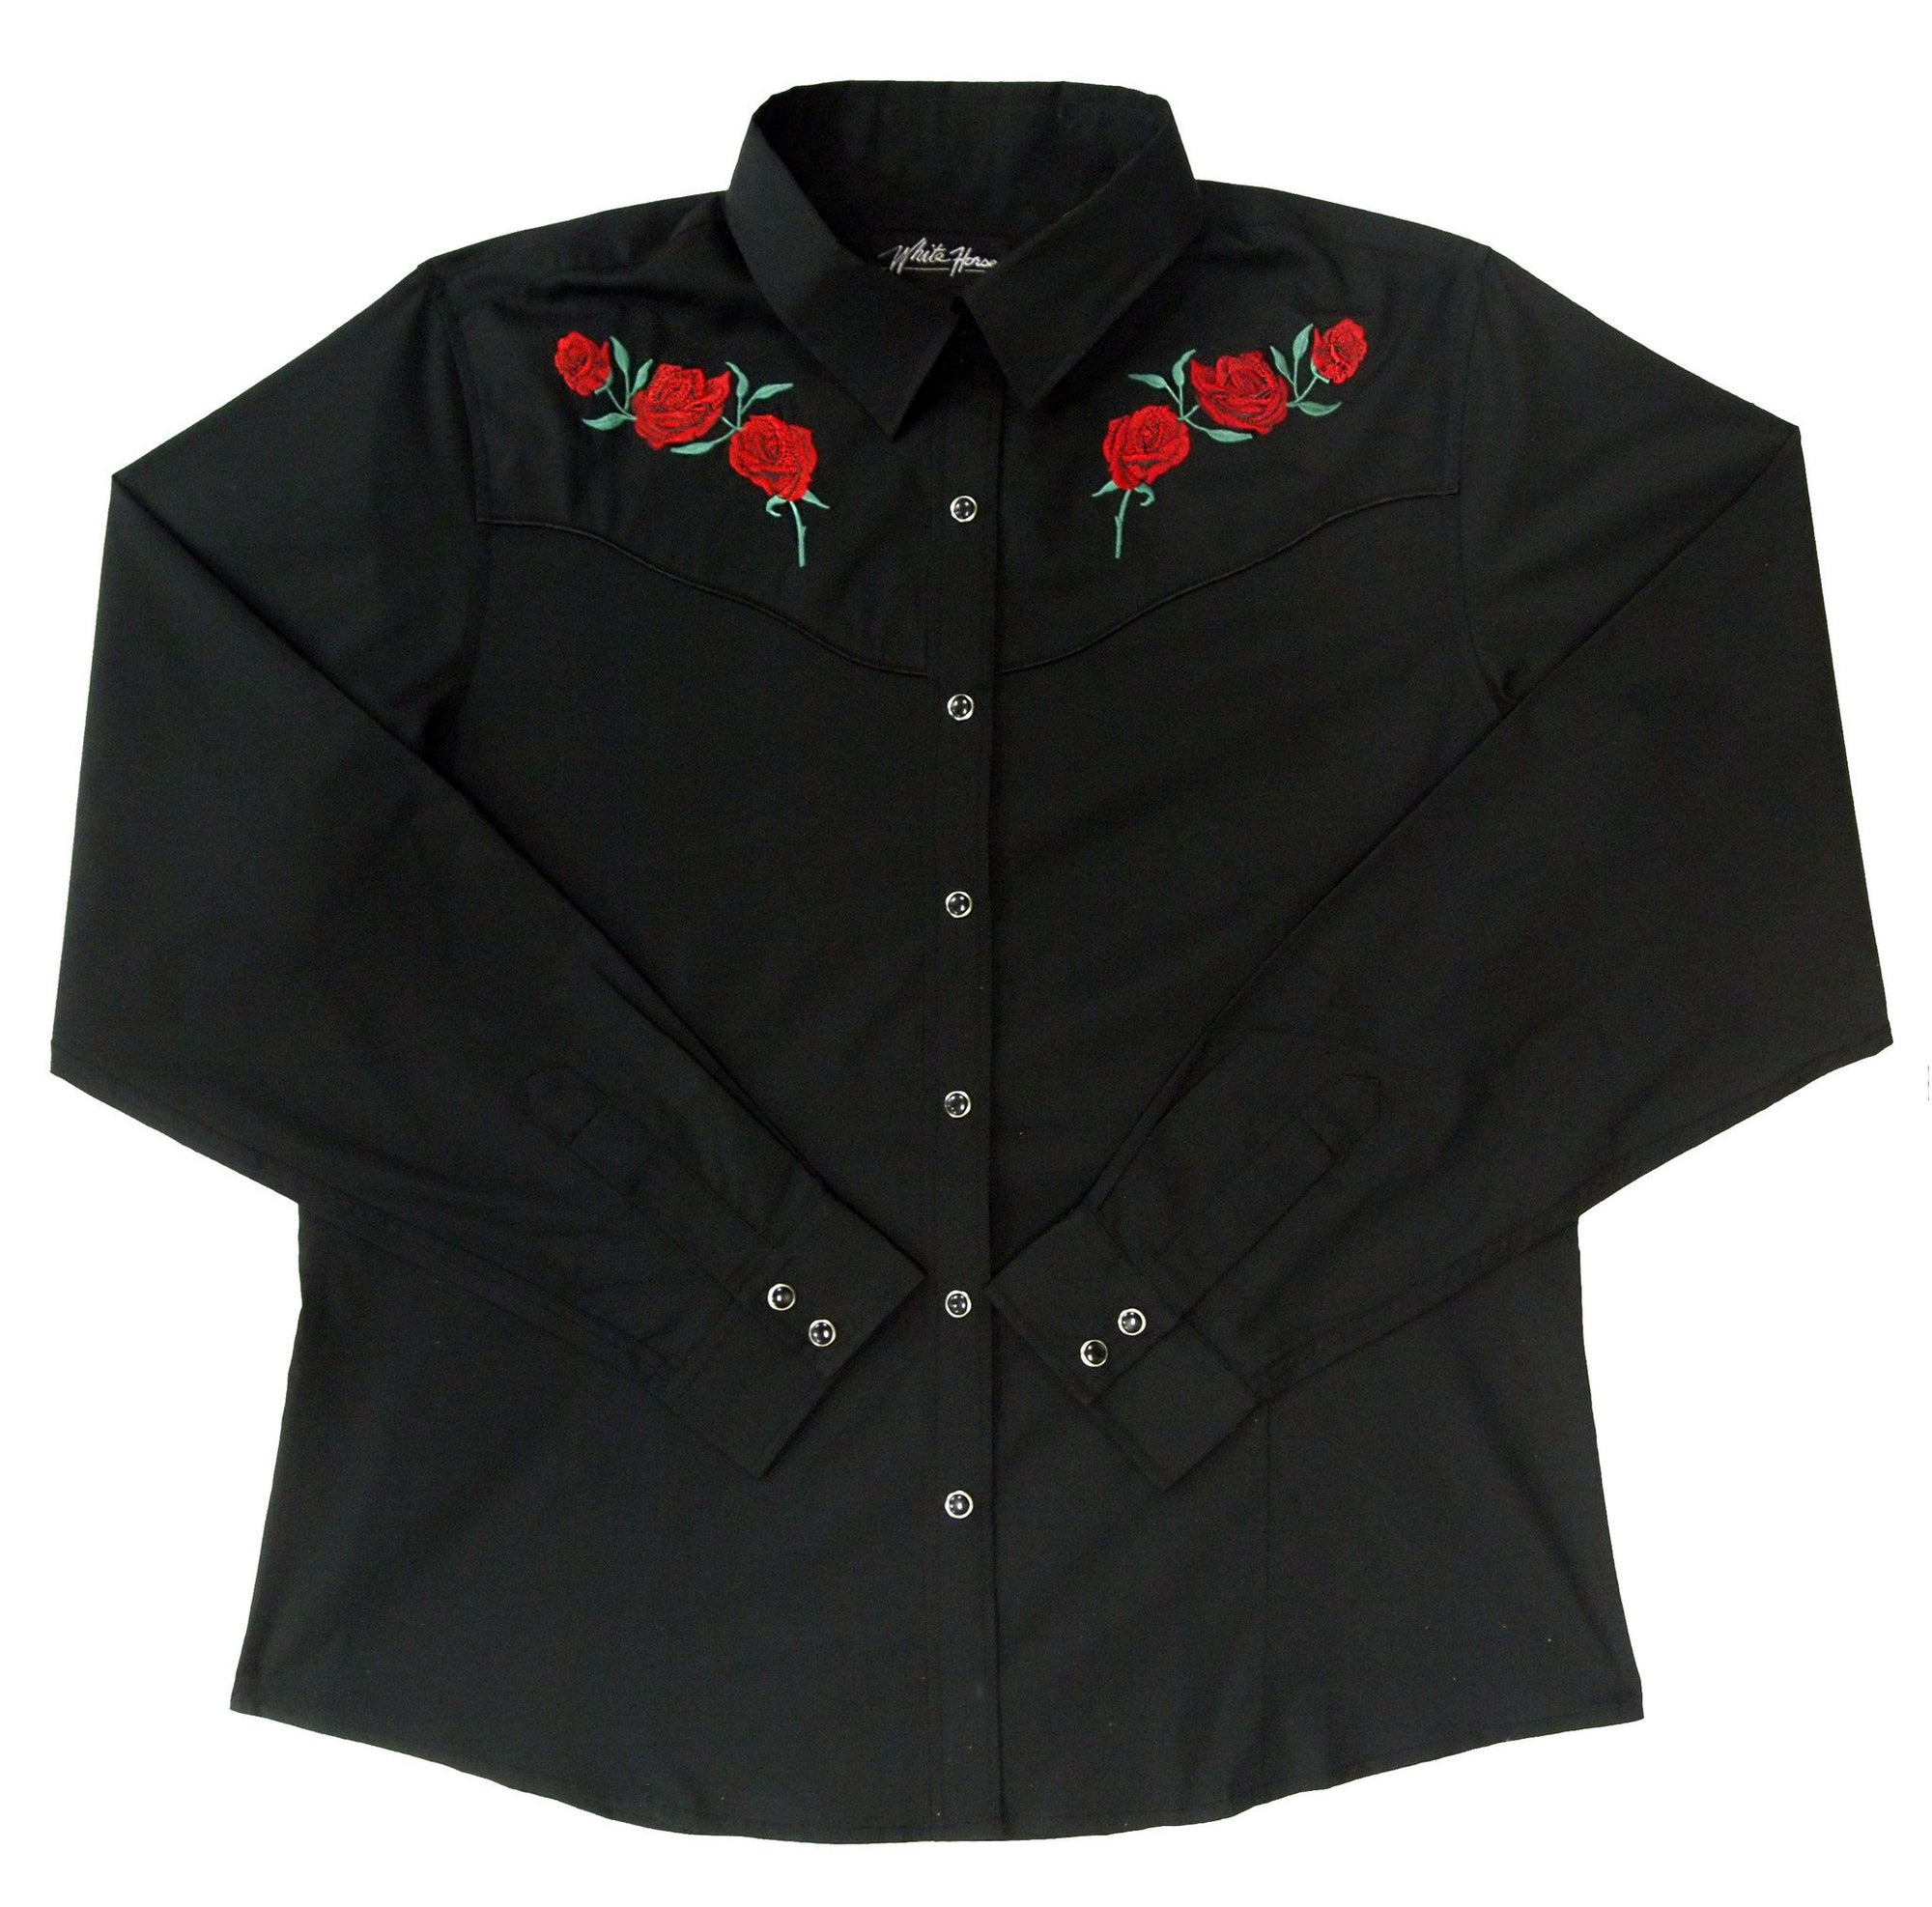 White Horse Apparel Women's Western Shirt Black with Red Roses